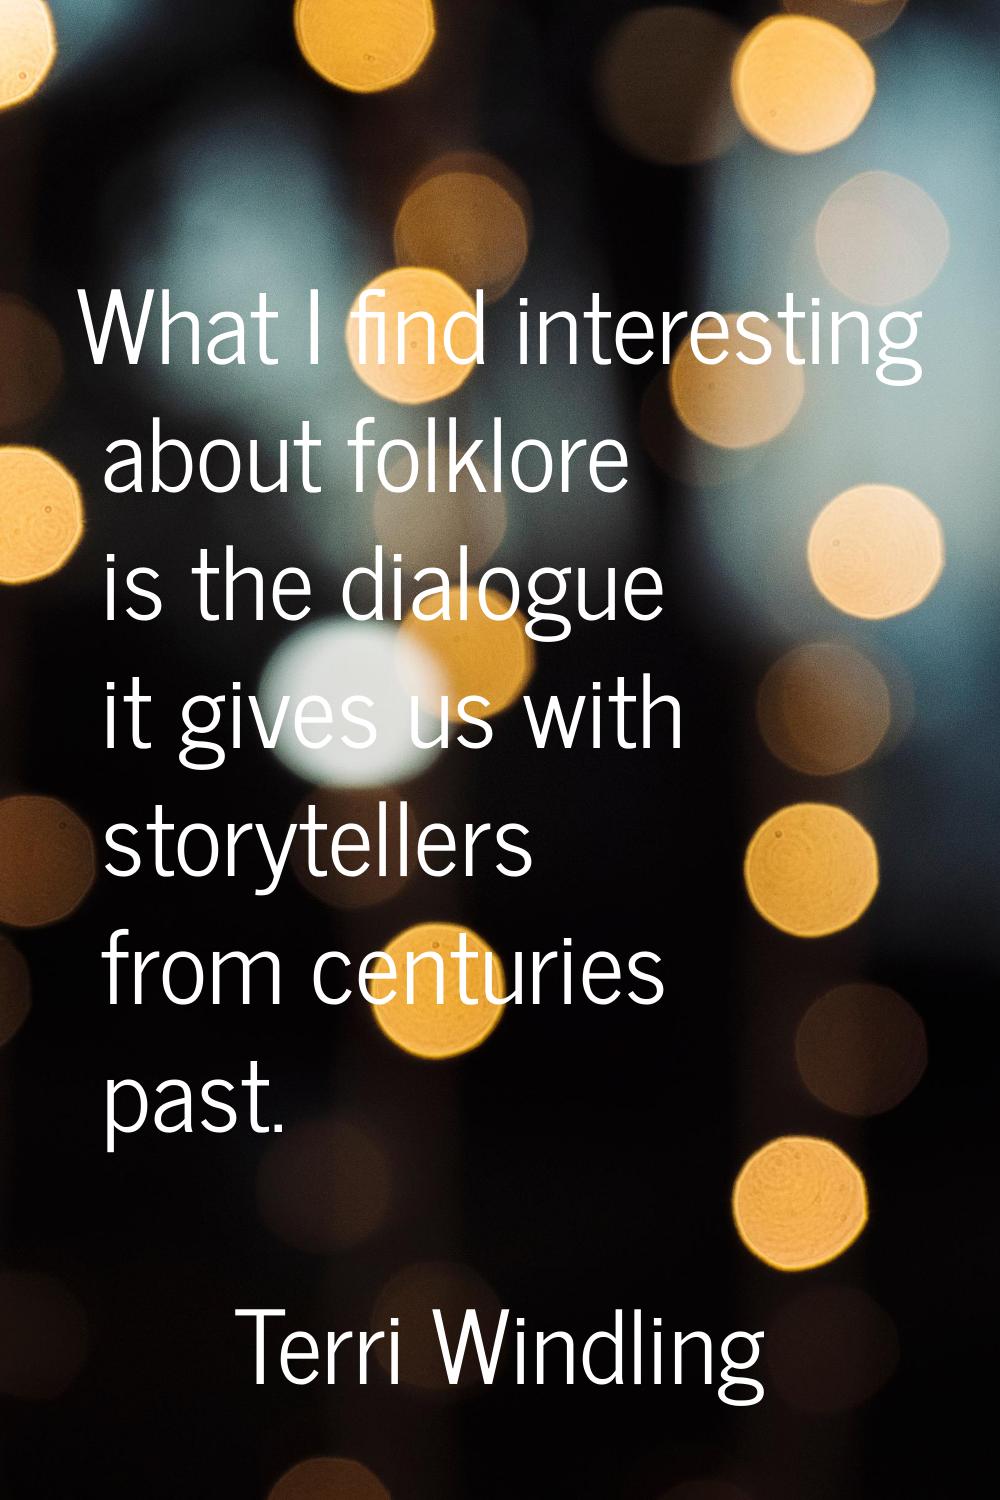 What I find interesting about folklore is the dialogue it gives us with storytellers from centuries